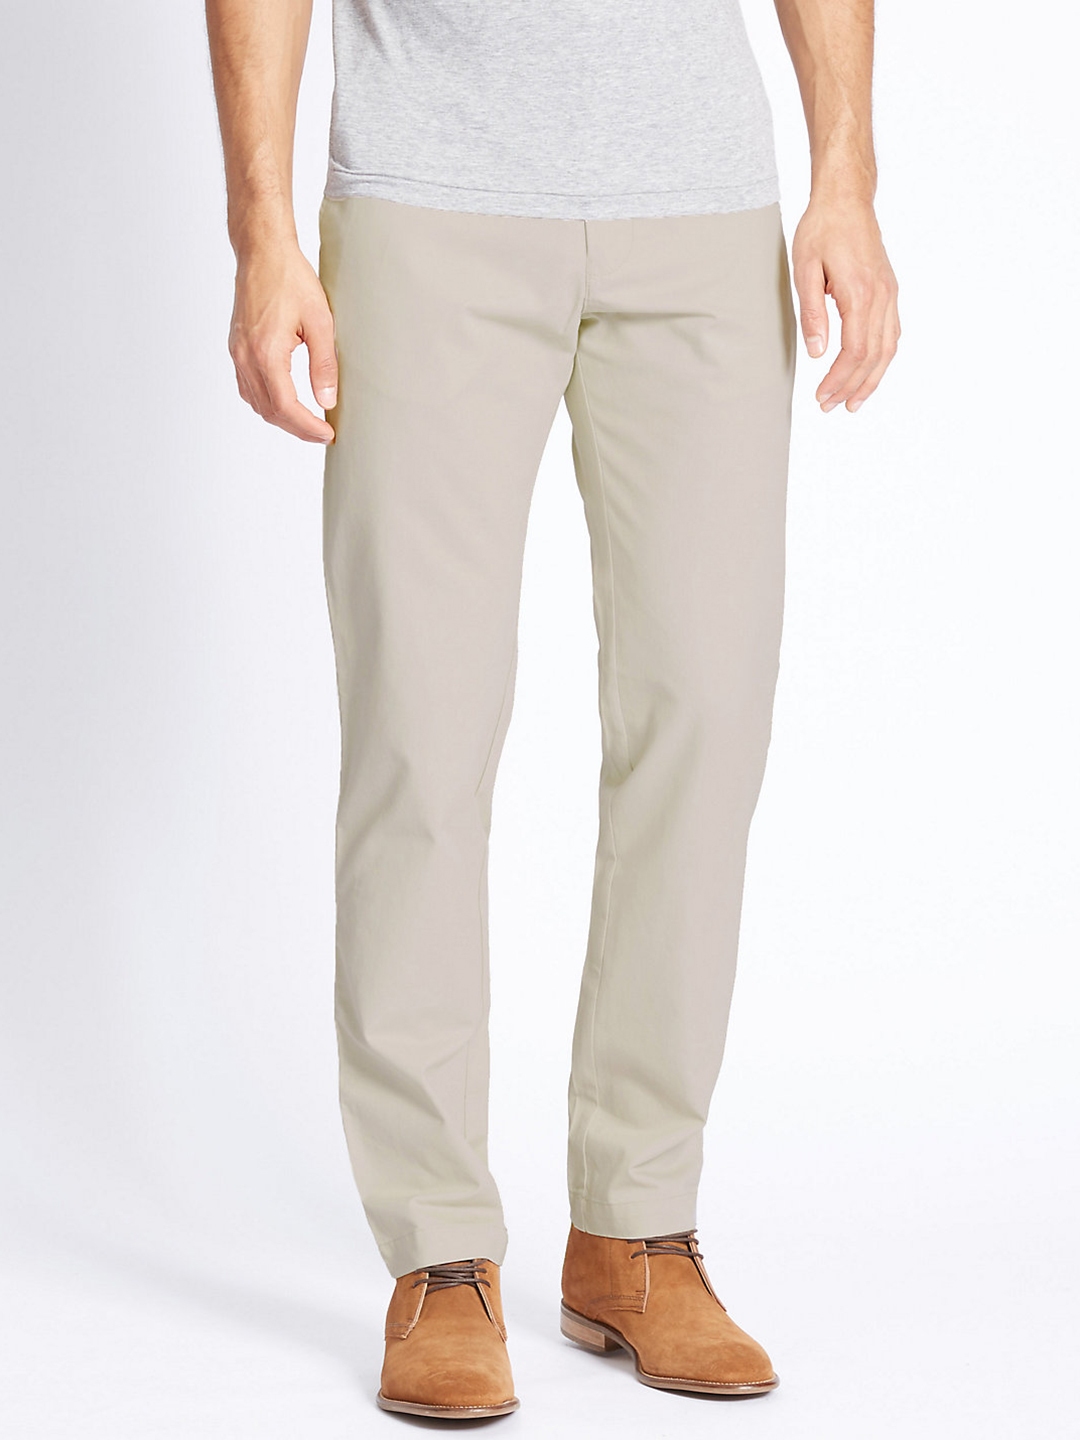 Buy Clay Grey Trousers  Pants for Men by Marks  Spencer Online  Ajiocom